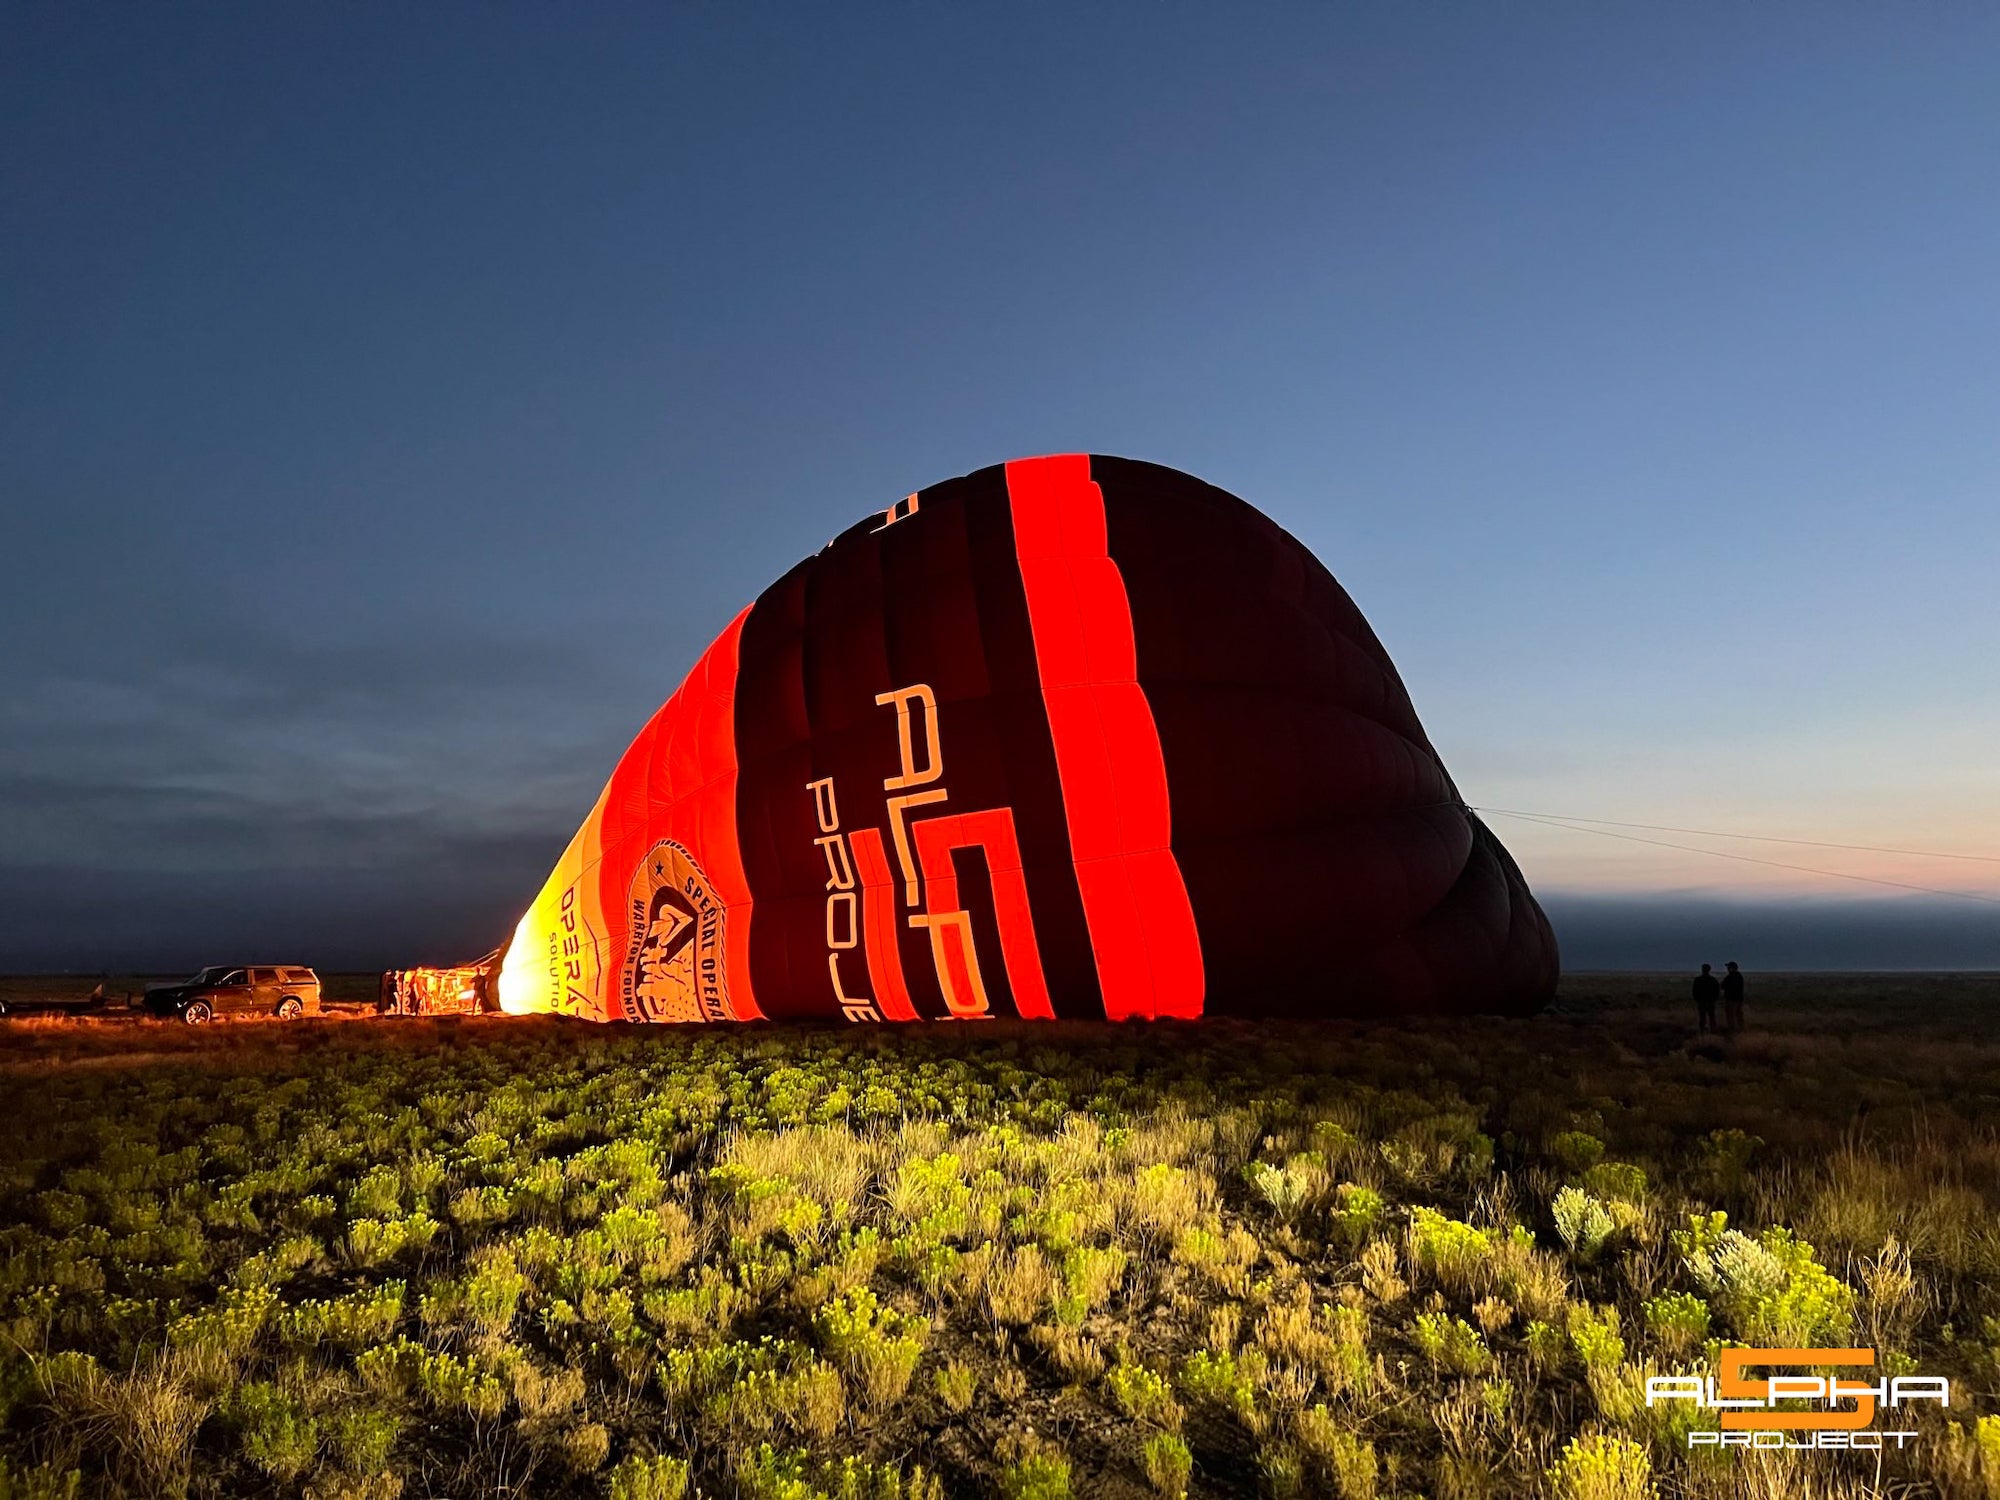 The balloon is designed to have a capacity of 560,000 cubic feet when fully inflated.